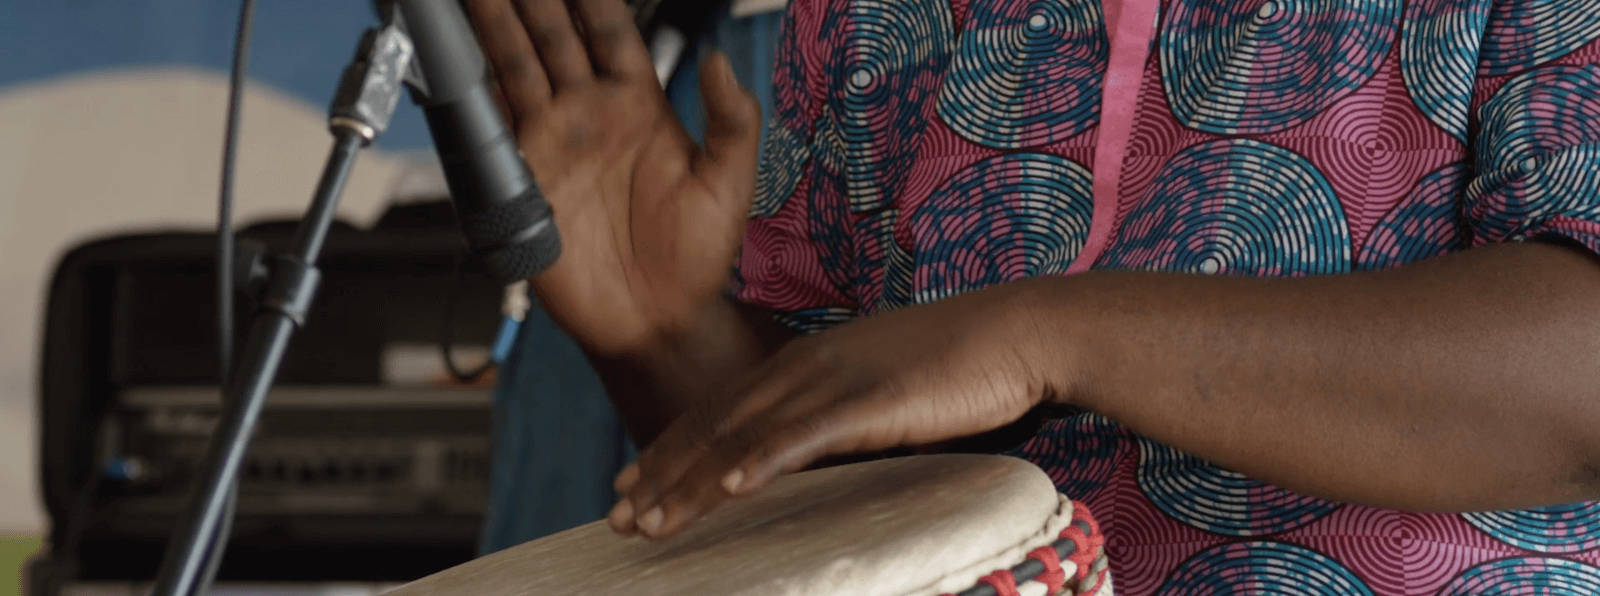 Close up of dark skinned hands beating a drum at an outdoor event